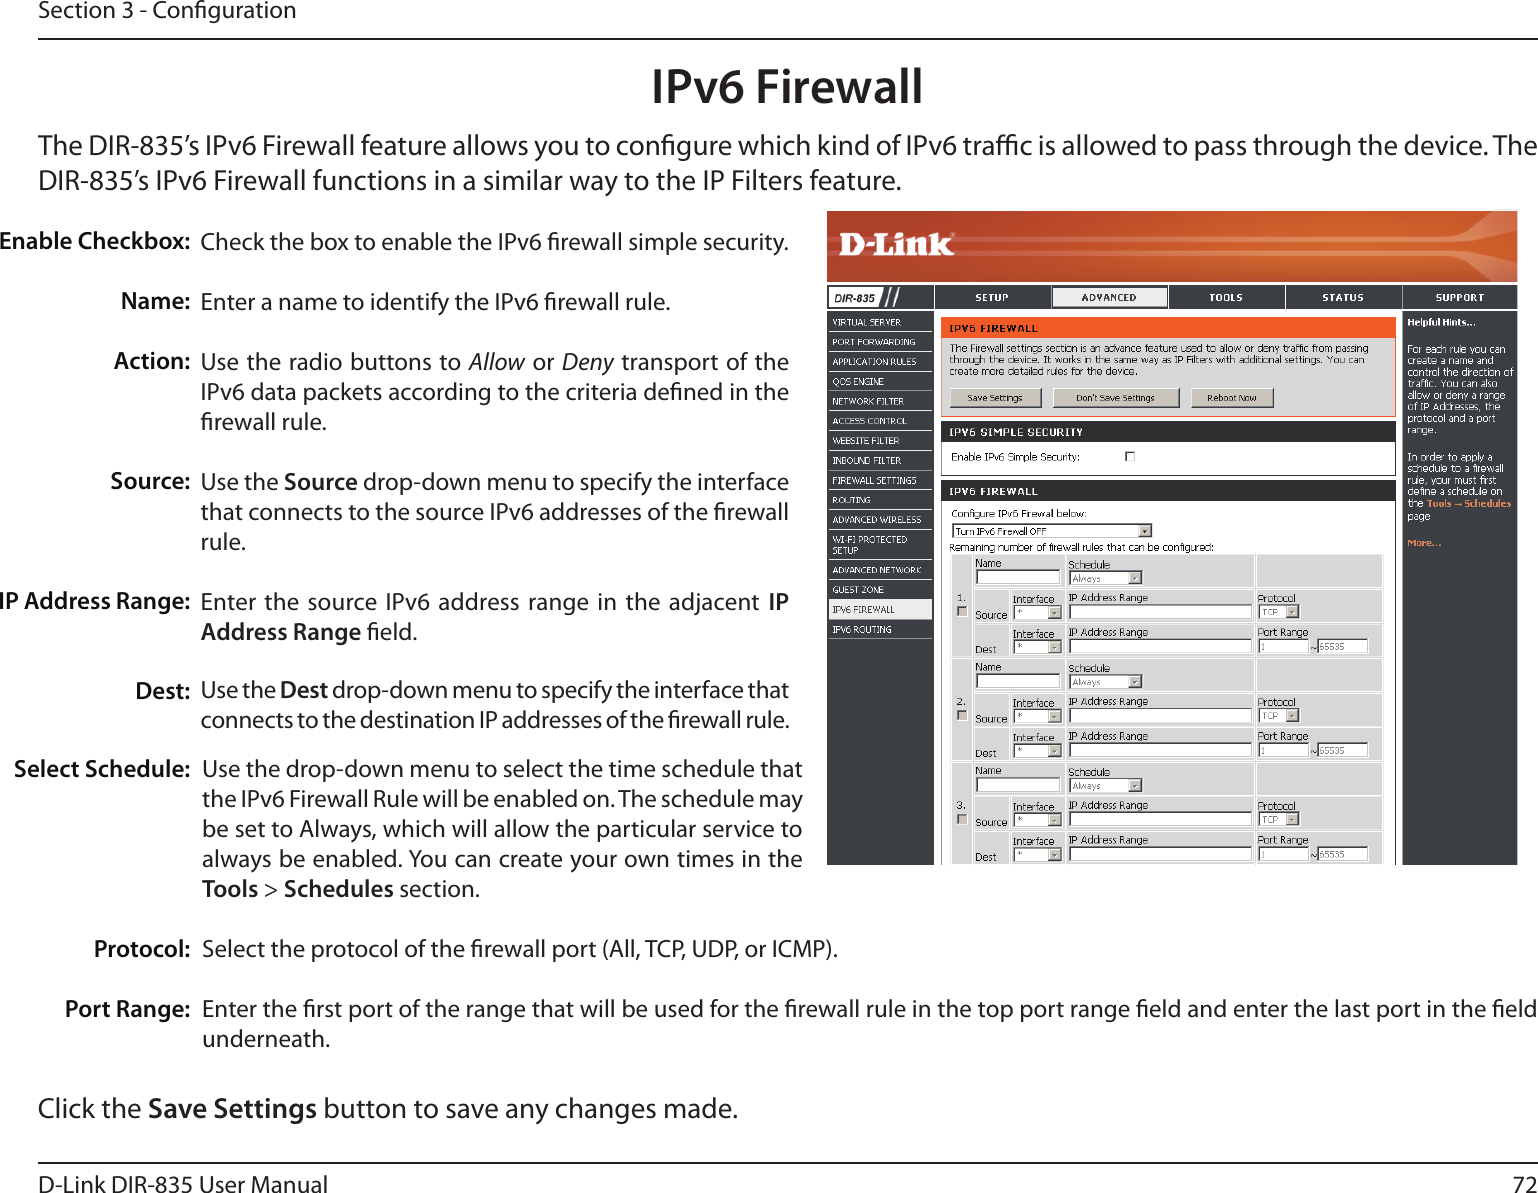 72D-Link DIR-835 User ManualSection 3 - CongurationIPv6 FirewallThe DIR-835’s IPv6 Firewall feature allows you to congure which kind of IPv6 trac is allowed to pass through the device. The DIR-835’s IPv6 Firewall functions in a similar way to the IP Filters feature.Check the box to enable the IPv6 rewall simple security.Enter a name to identify the IPv6 rewall rule.Use the radio buttons to Allow or Deny transport of the IPv6 data packets according to the criteria dened in the rewall rule.Use the Source drop-down menu to specify the interface that connects to the source IPv6 addresses of the rewall rule. Enter the source IPv6  address range in the  adjacent  IP Address Range eld.Use the Dest drop-down menu to specify the interface that connects to the destination IP addresses of the rewall rule. Enable Checkbox:Name:Action:Source:IP Address Range:Dest:Use the drop-down menu to select the time schedule that the IPv6 Firewall Rule will be enabled on. The schedule may be set to Always, which will allow the particular service to always be enabled. You can create your own times in the Tools &gt; Schedules section. Select the protocol of the rewall port (All, TCP, UDP, or ICMP).Enter the rst port of the range that will be used for the rewall rule in the top port range eld and enter the last port in the eld underneath.Select Schedule:                       Protocol:Port Range:Click the Save Settings button to save any changes made.